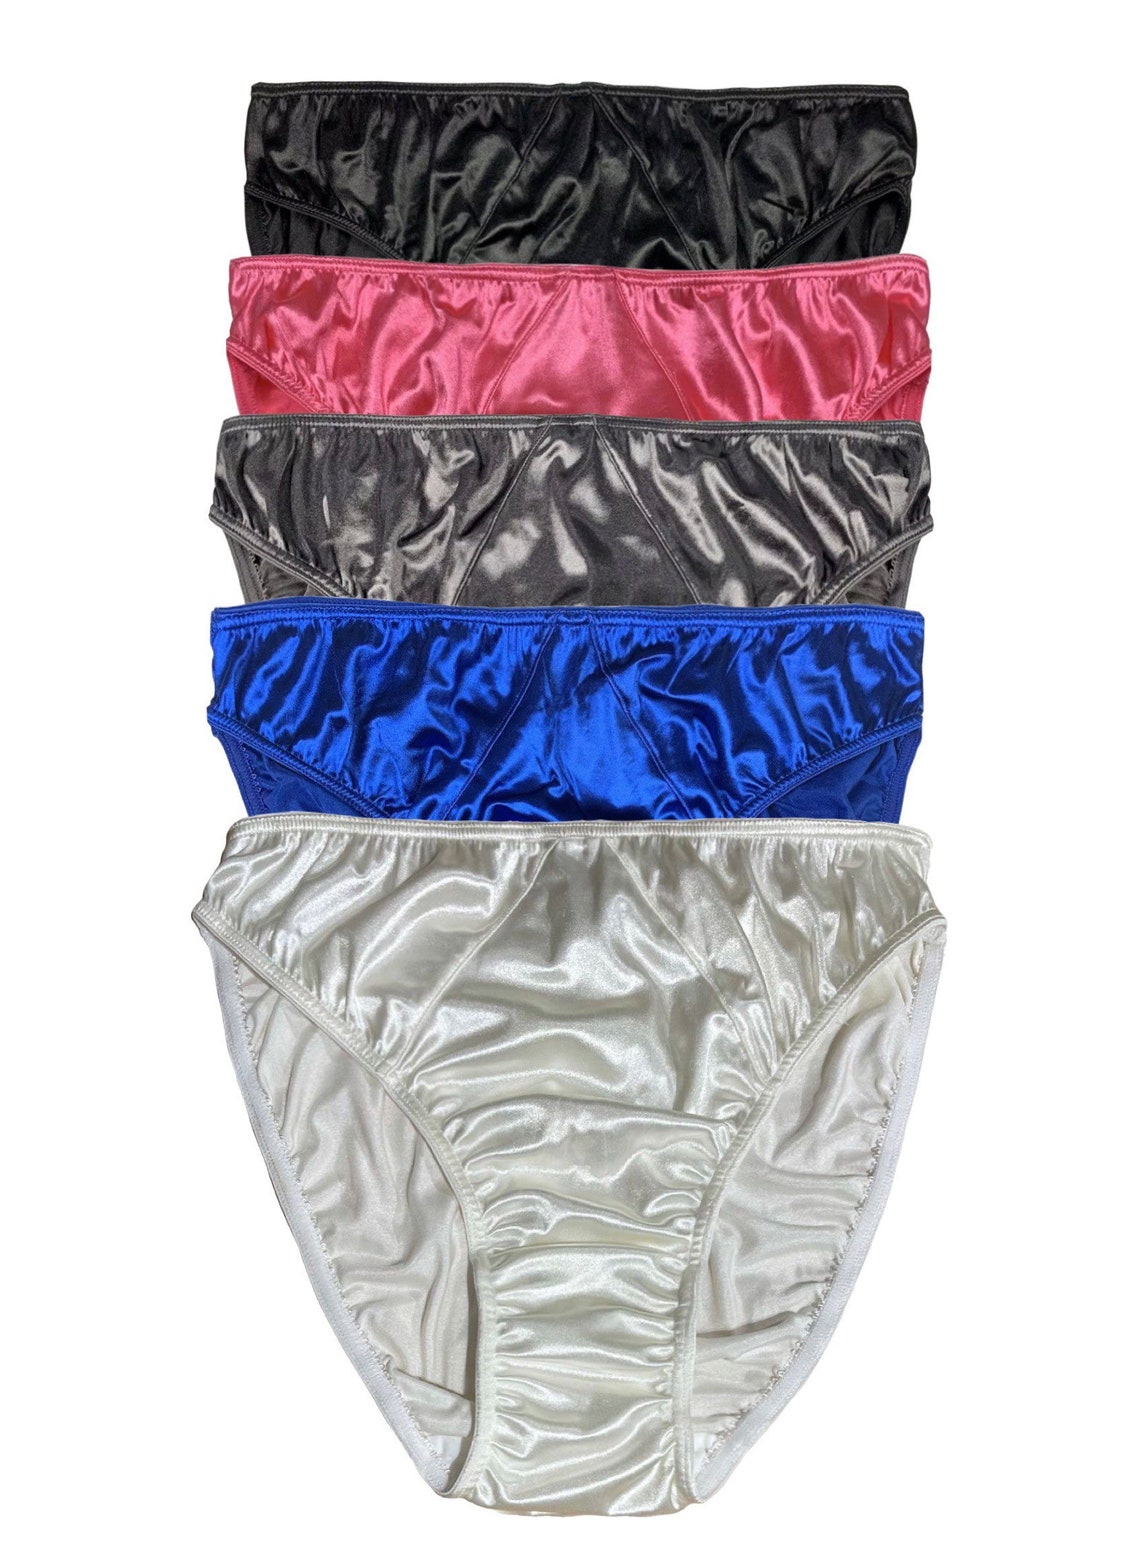 Classic Satin Brief Panty Second Skin Satin 5 Pack | Etsy